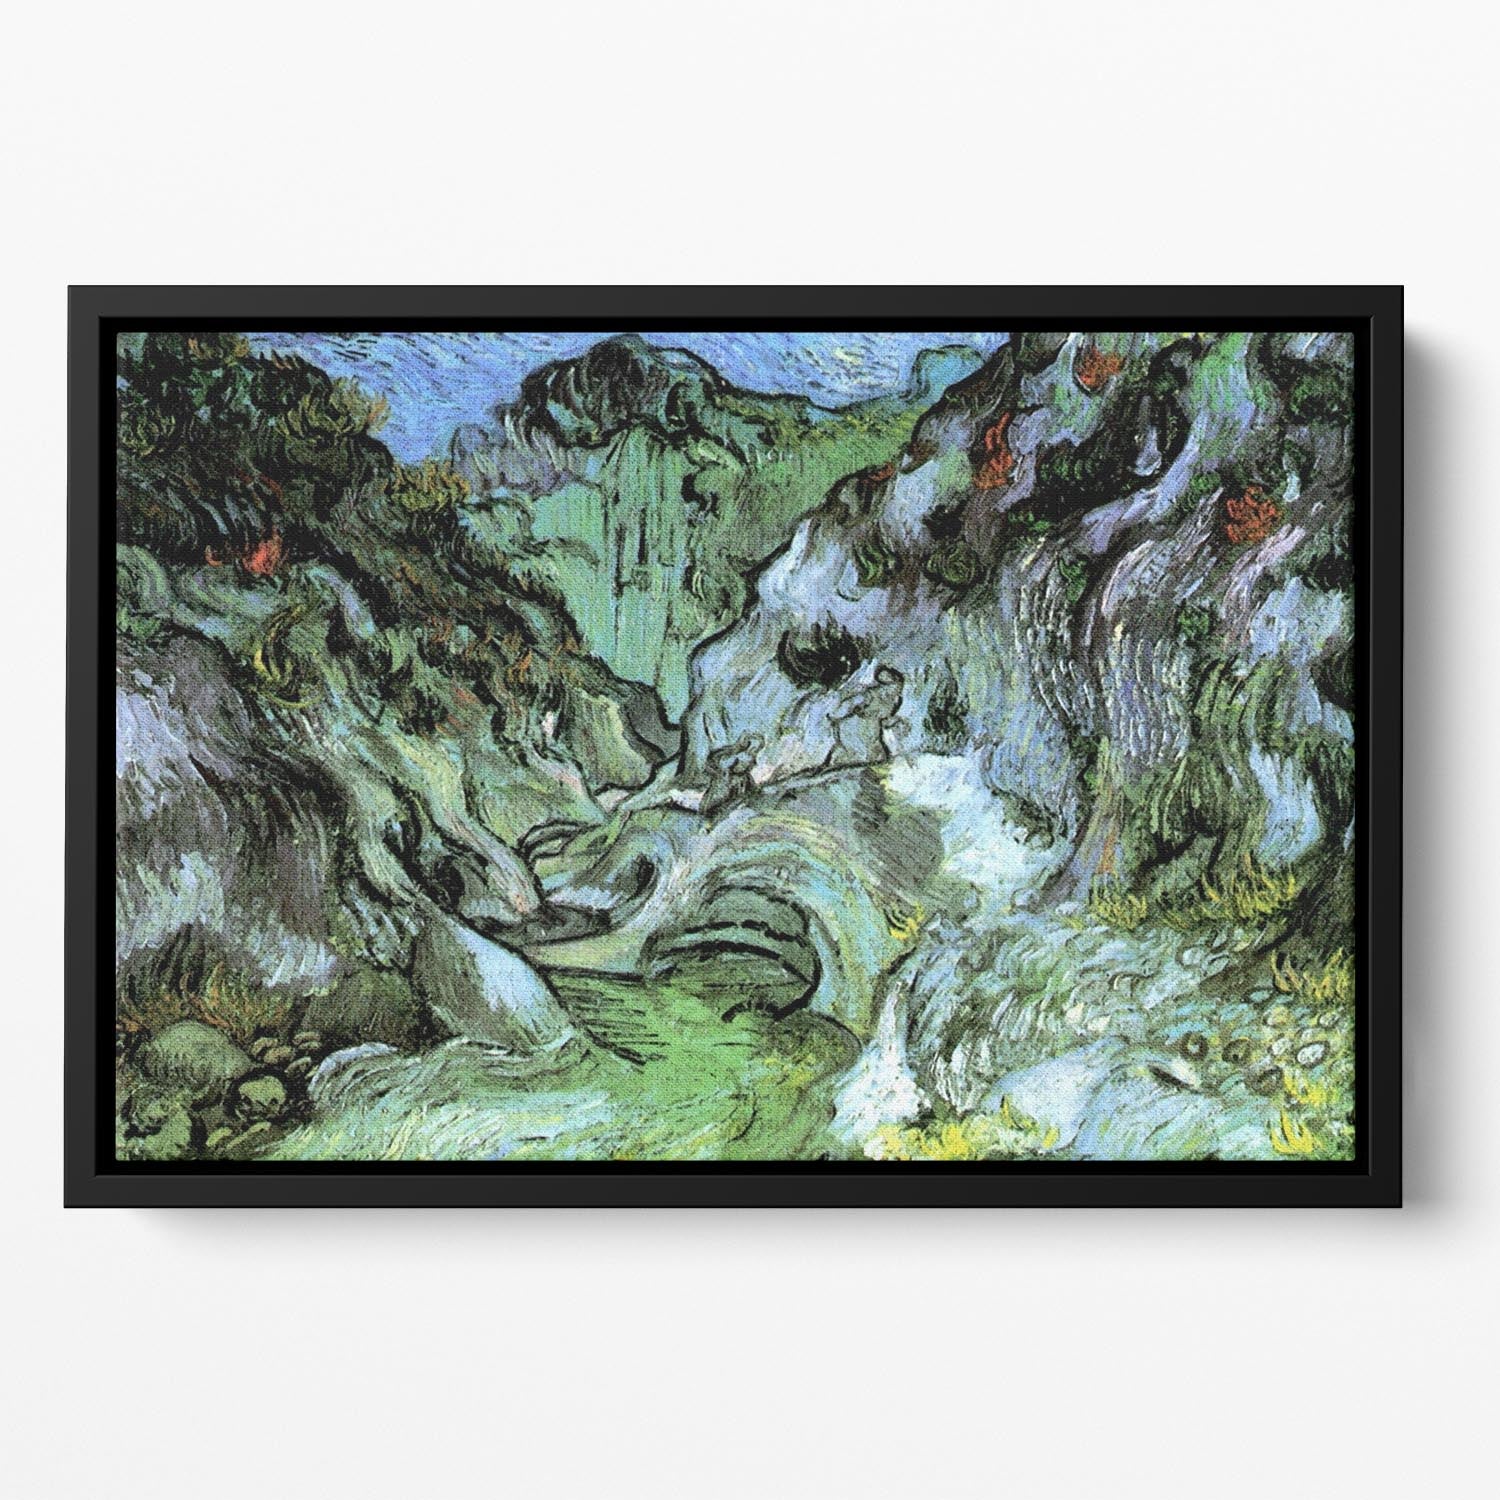 Les Peiroulets Ravine 2 by Van Gogh Floating Framed Canvas